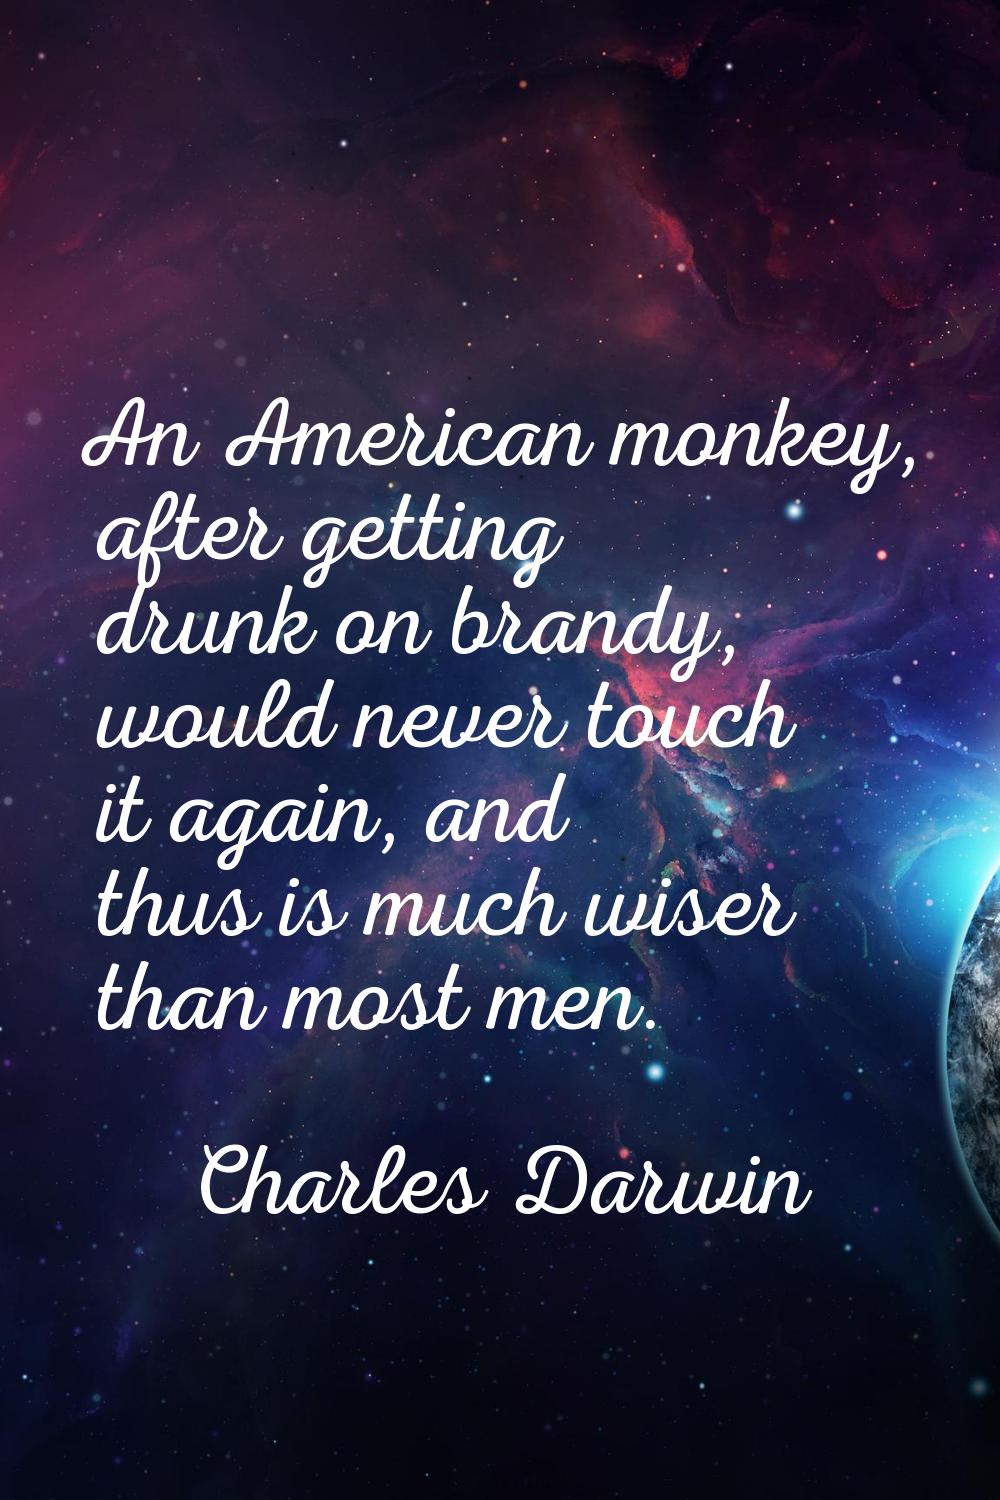 An American monkey, after getting drunk on brandy, would never touch it again, and thus is much wis